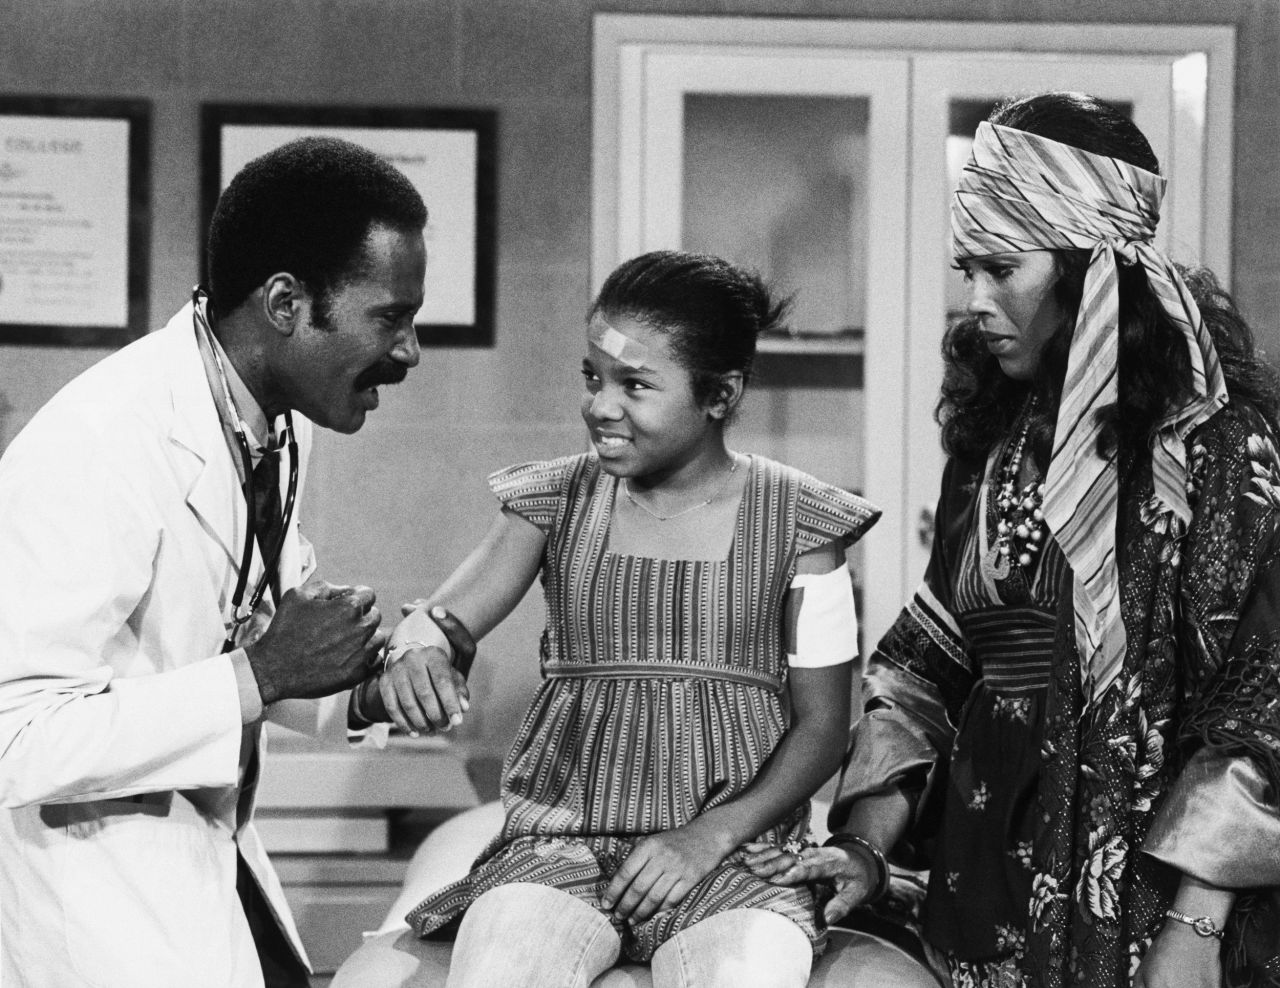 Janet Jackson appears in a 1977 episode of the TV sitcom "Good Times" alongside actors Bob Delegall and Ja'net DuBois.